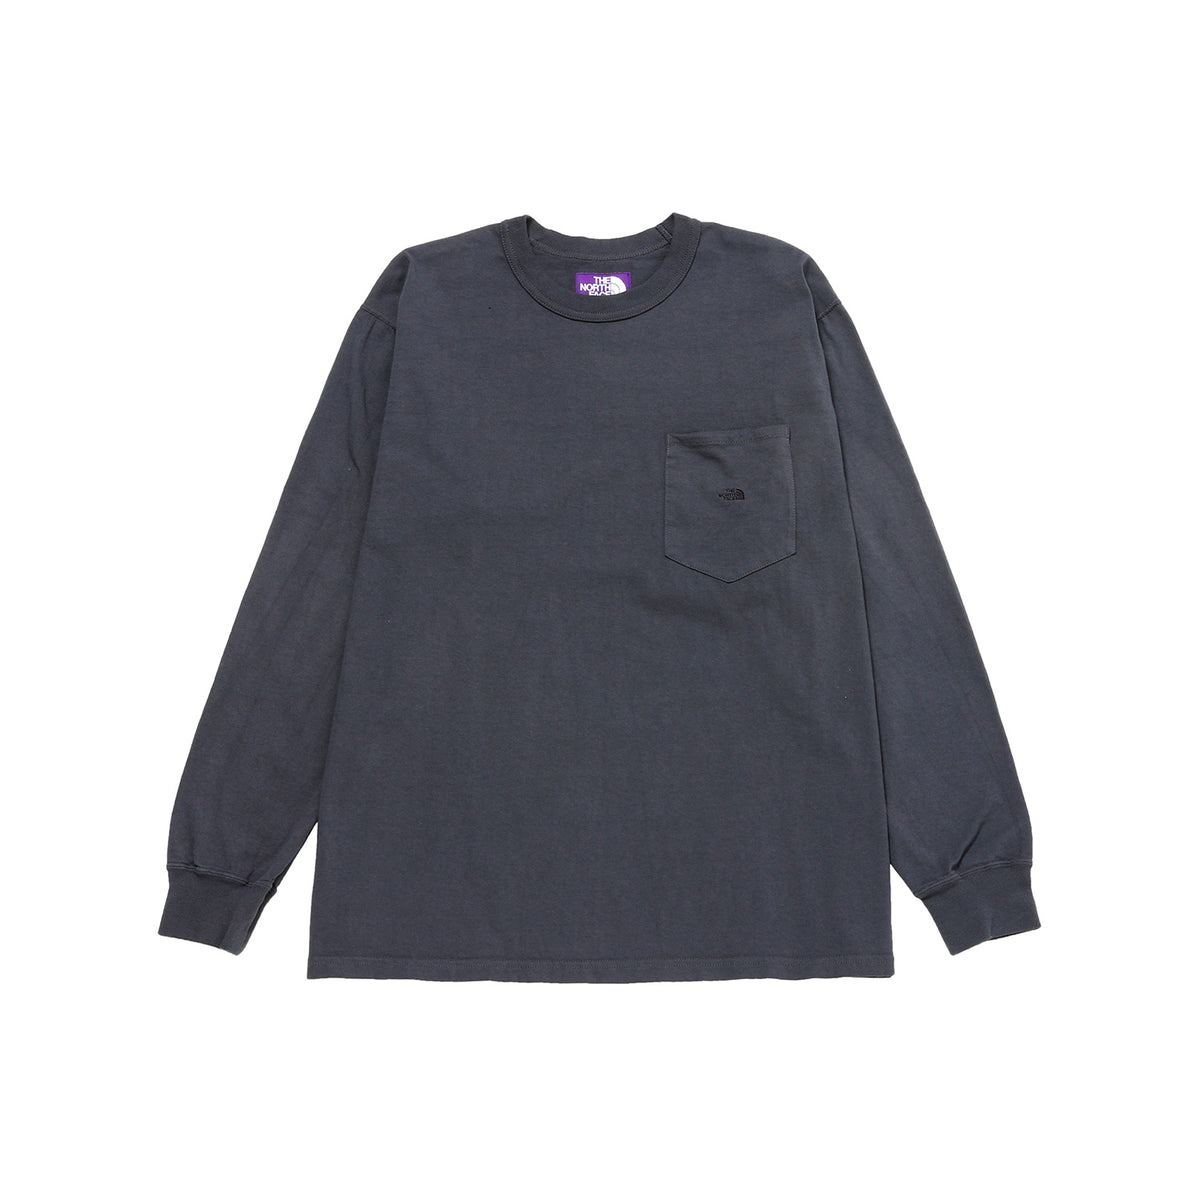 7oz Long Sleeve Pocket Tee - THE NORTH FACE PURPLE LABEL 